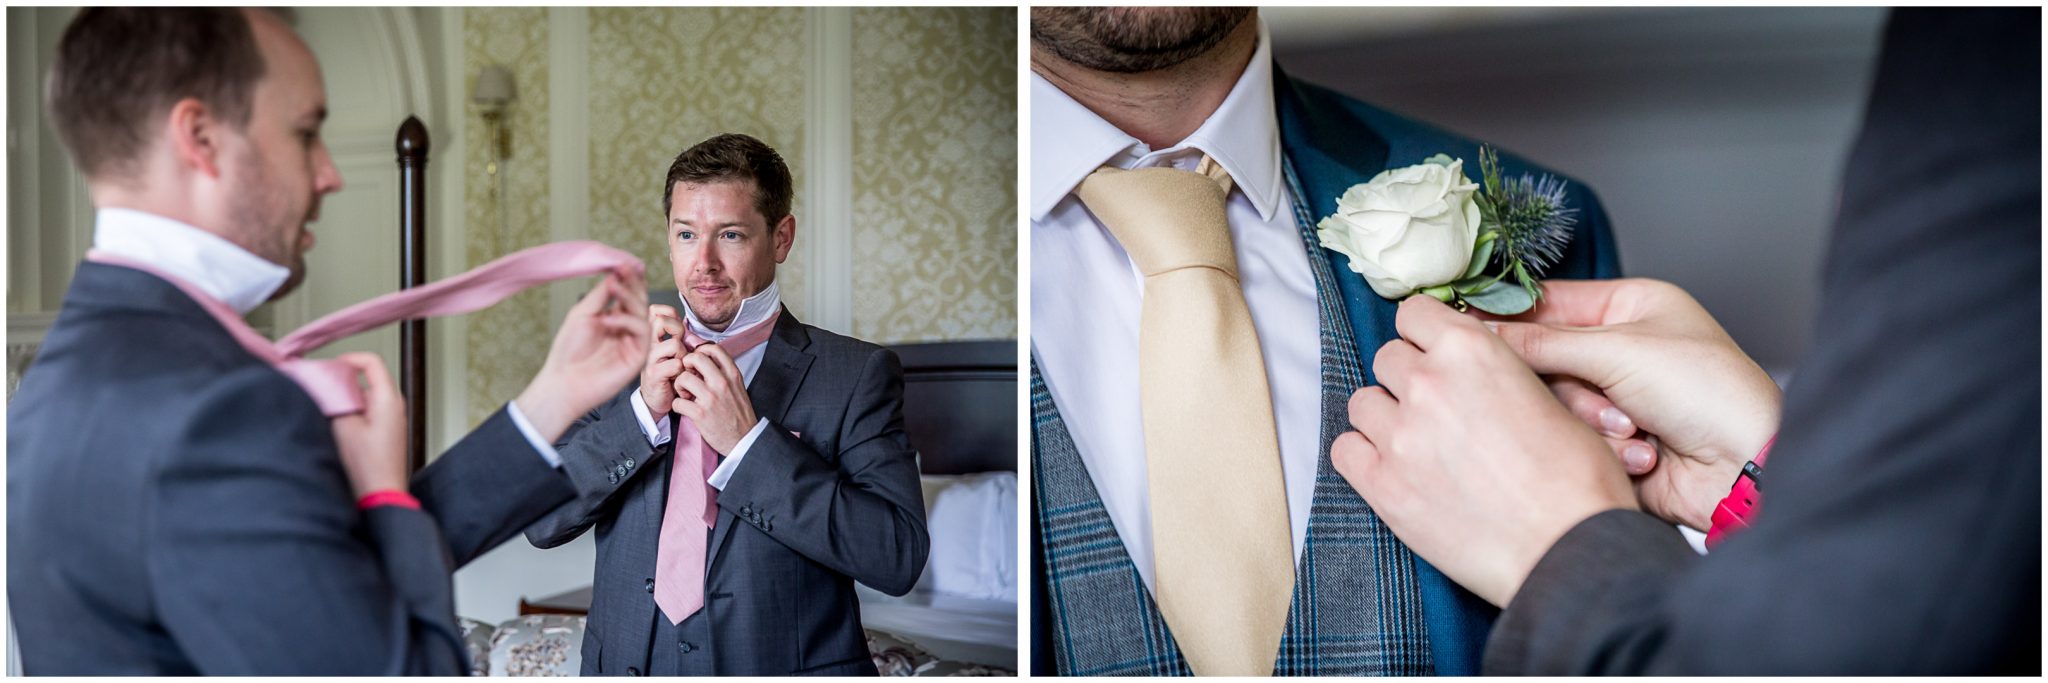 Groomsmen with ties and buttonholes